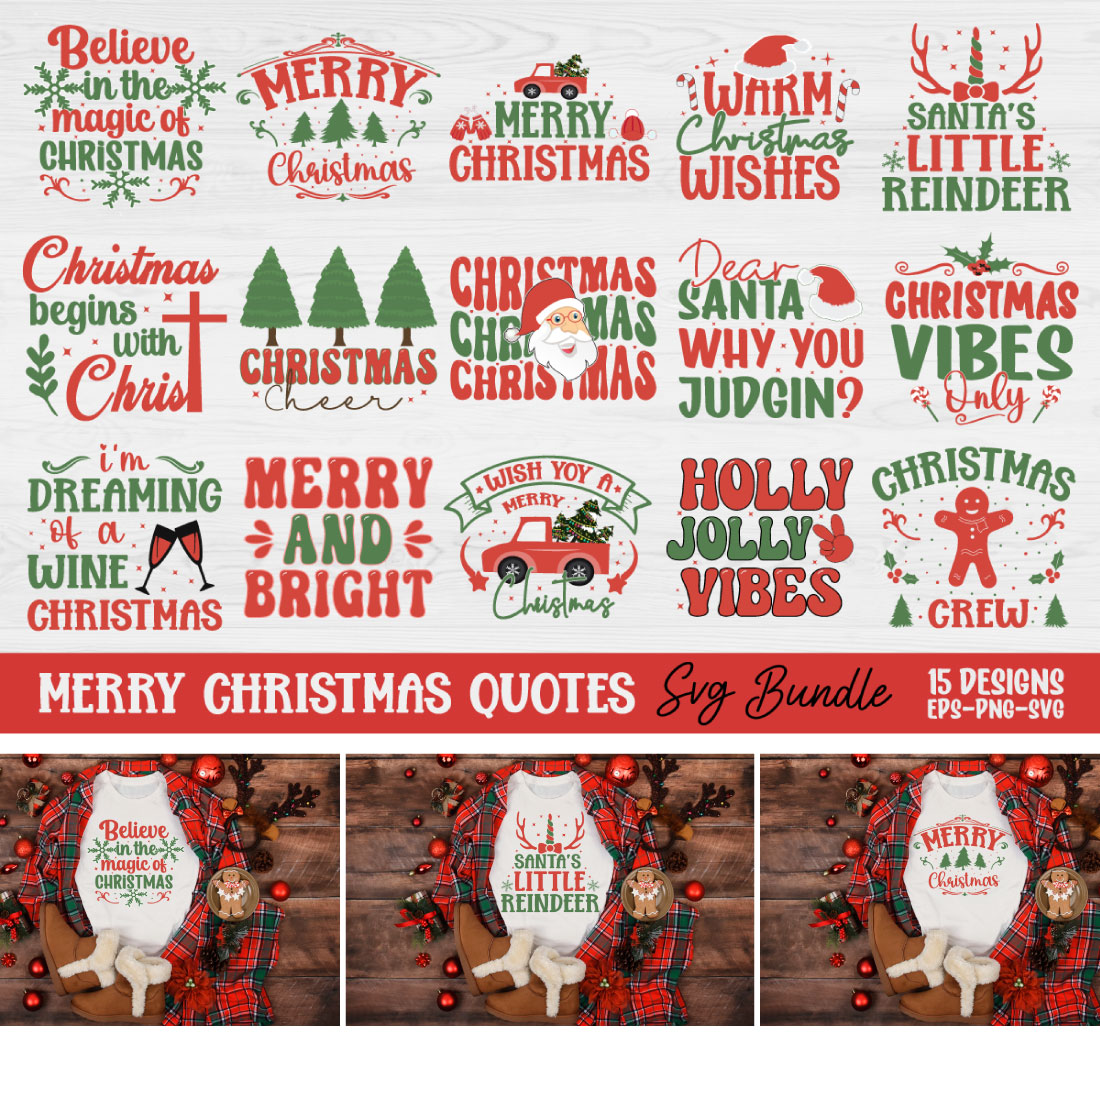 Merry Christmas Quotes SVG Bundle 15 Designs cover image.